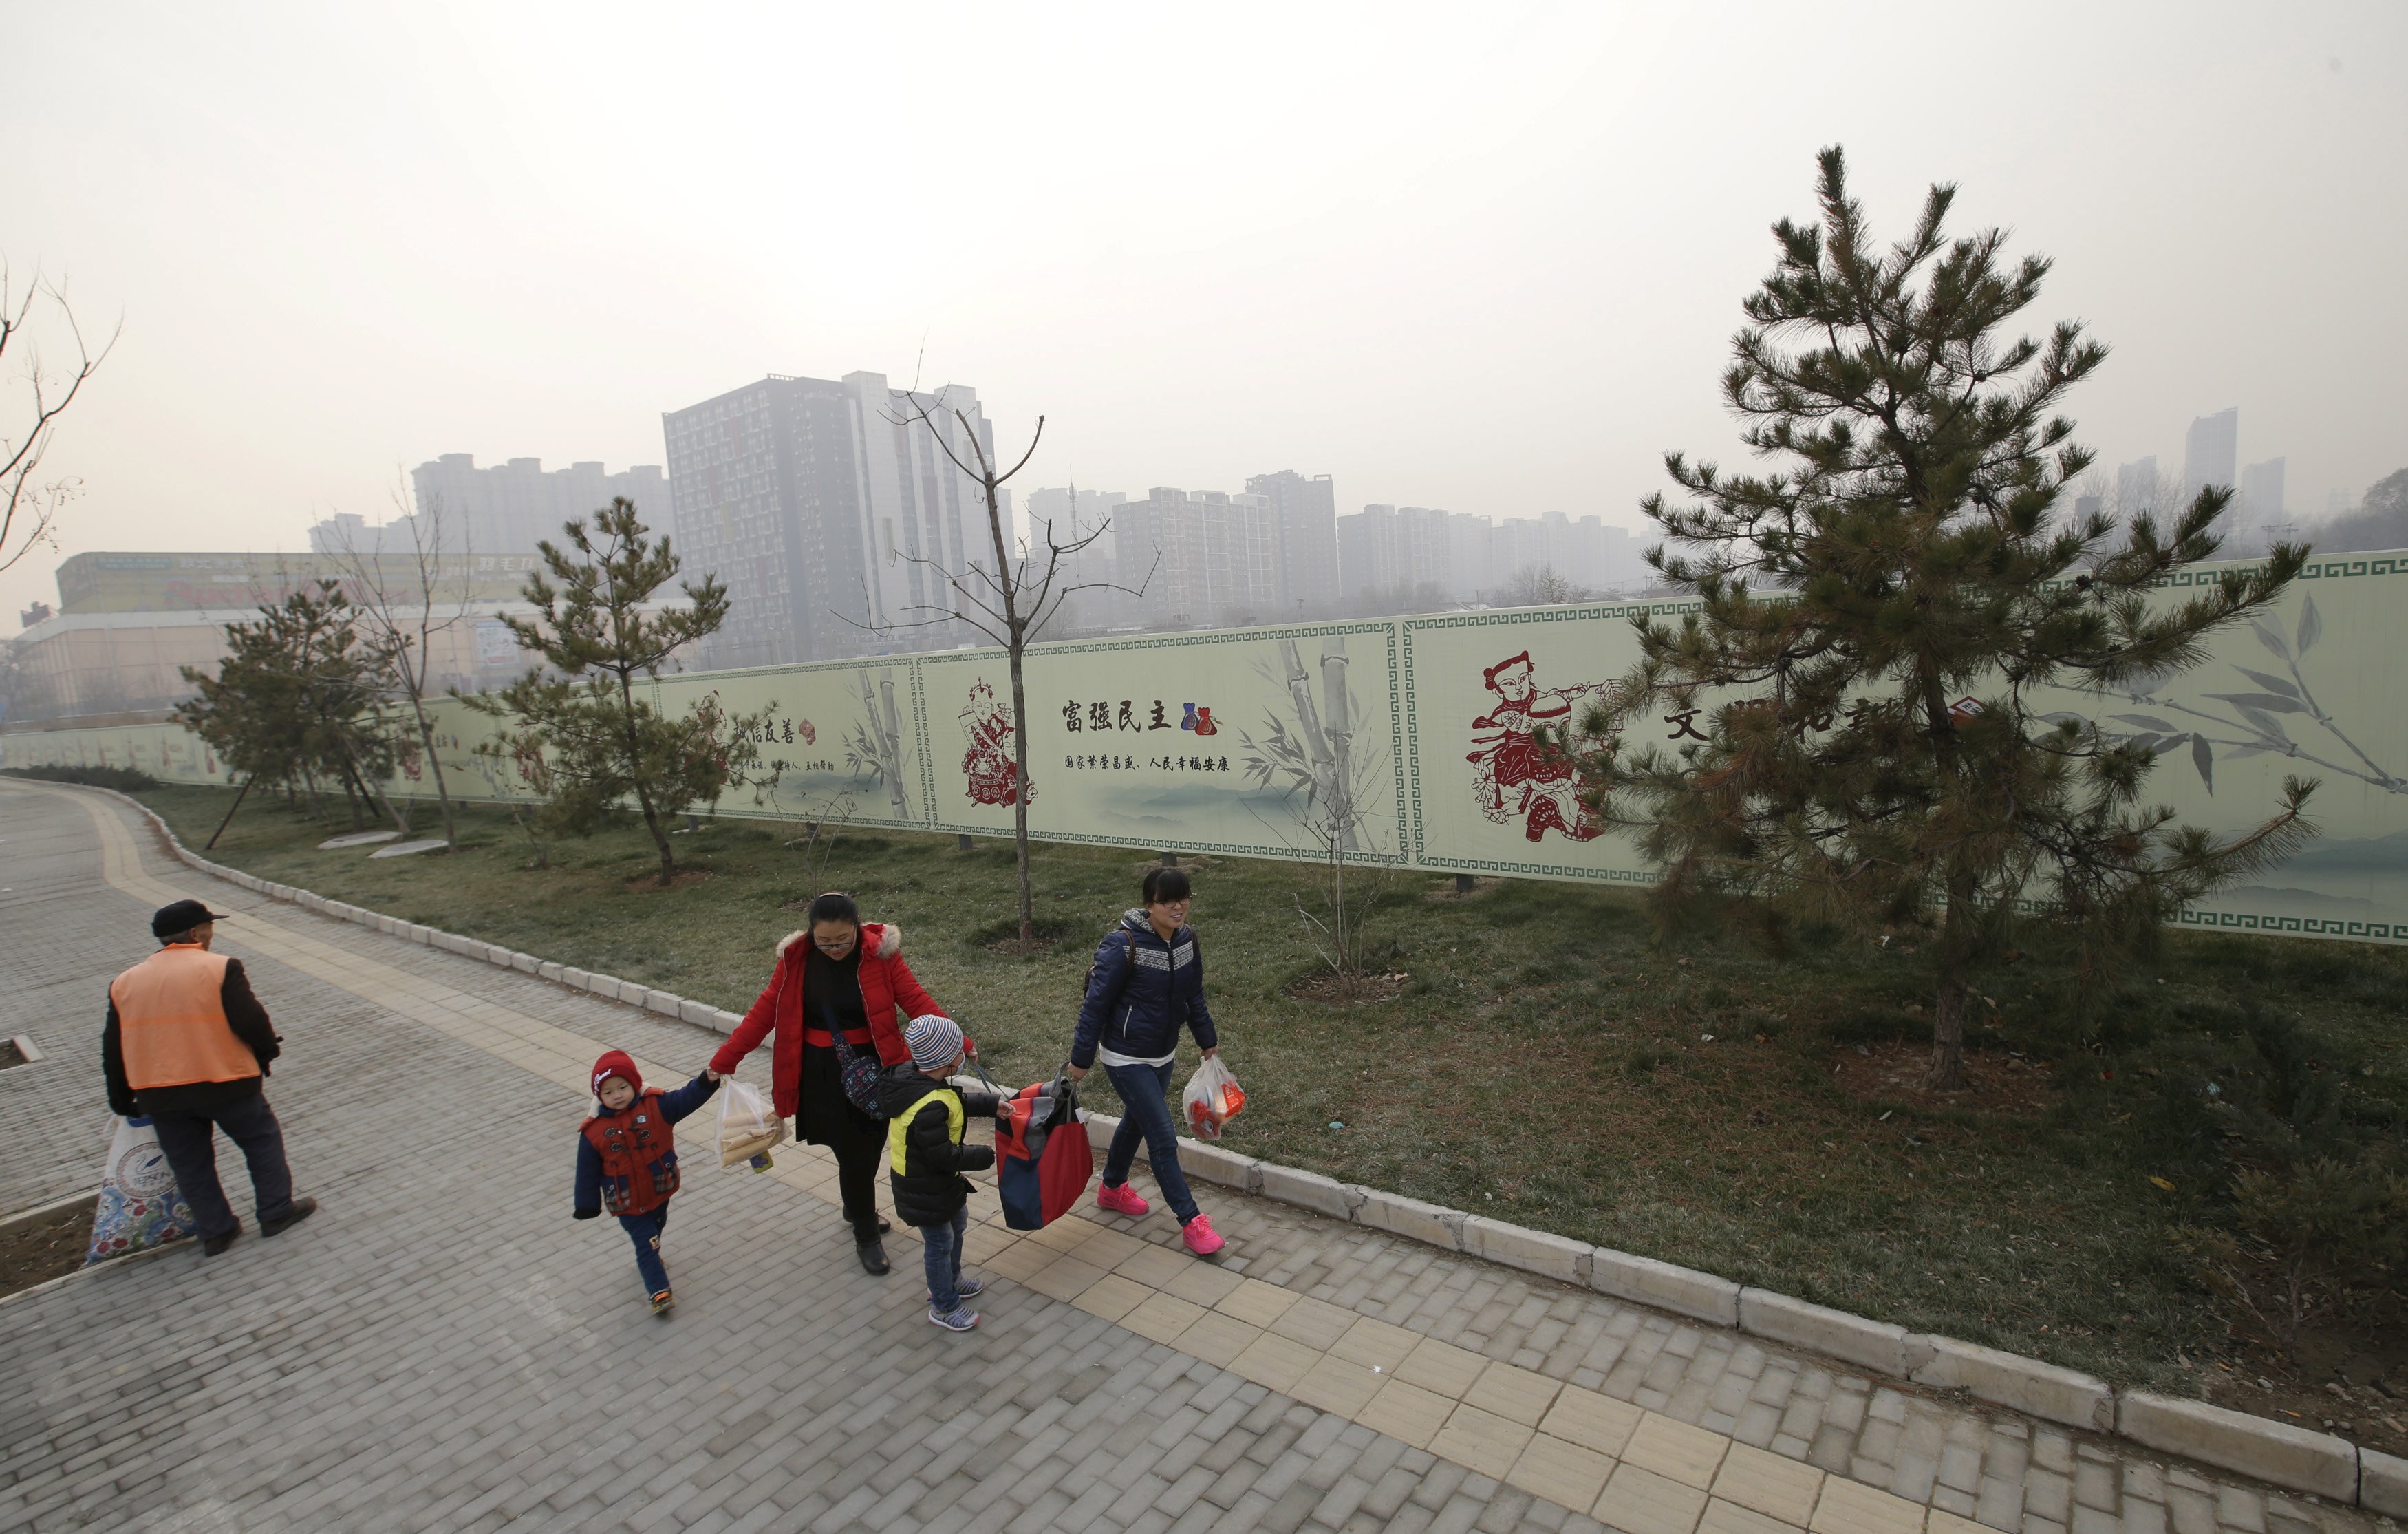 Residents walk past a wall (rear) surrounding an empty field, which was purchased by a Chinese real estate developer for 3.3 billion yuan ($515 million) in November, on a hazy day in Beijing, China, December 6, 2015. To match CHINA-ECONOMY/HOUSING REUTERS/Jason Lee